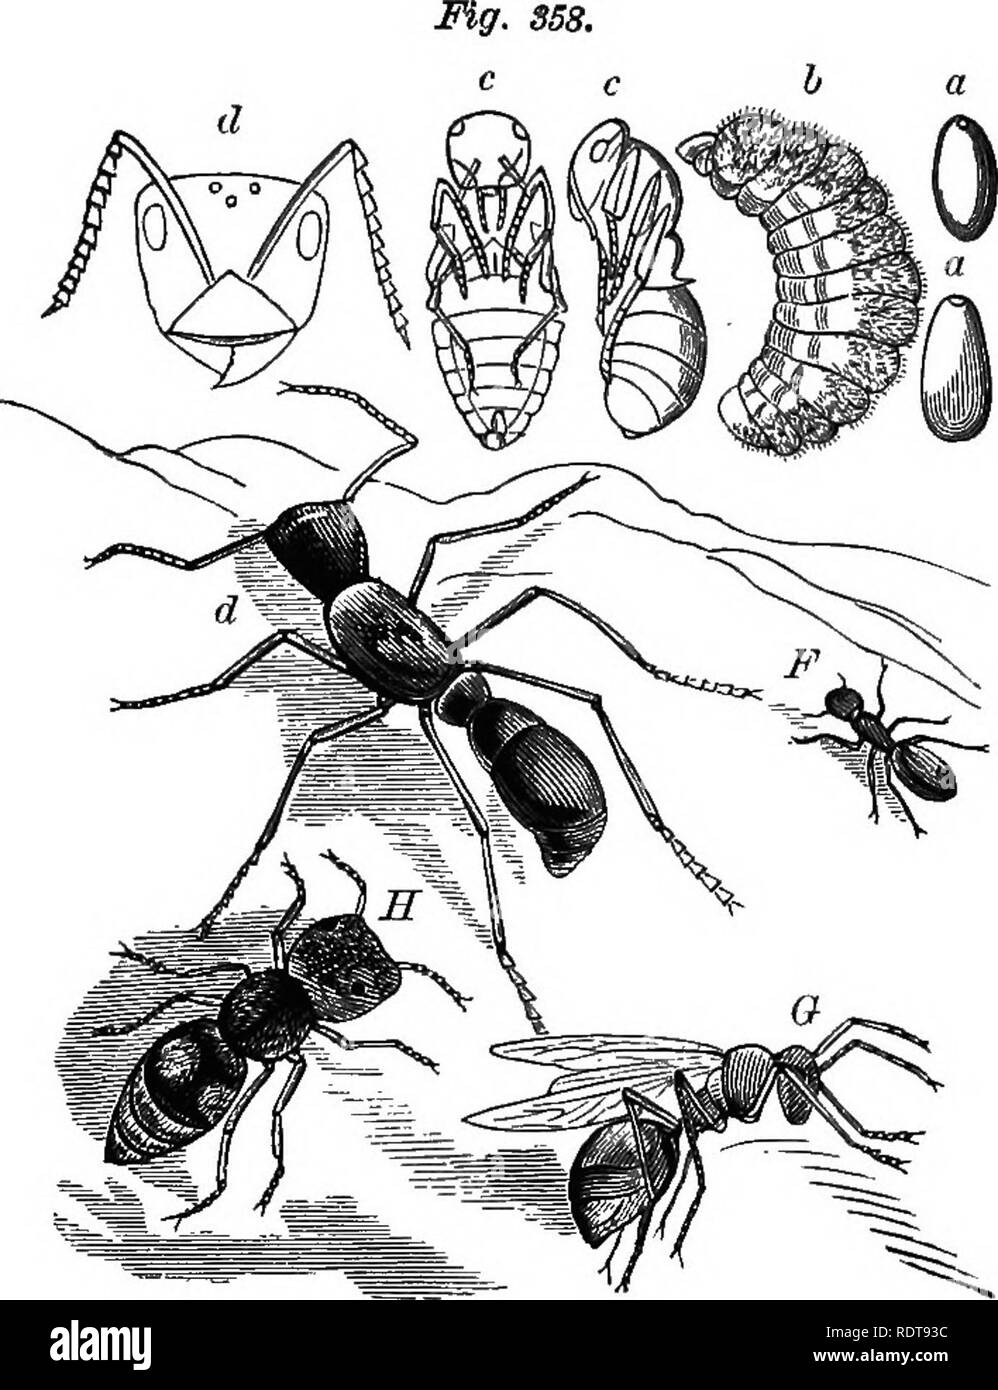 . Fourteen weeks in zoology. Zoology. CLASS iksecta: order htmenoptera, 209. a. Egg; b. Larva ; c Pupa of Ants; d. Pon^a grandis, Giant Ant; P. Forrmca sanguinia. Red Ant; G. Myrmecia forficdta; H. MutiUa cephcUdtos. looking grains about, an erroneous idea has aripen that the ants lay up food for winter. The habits of the various species are well worth study. The Agricultural Ants of Texas have a tiny farm, where they cultivate a plant {Aristida stricta) whose seed they harvest. The Sanguinary Ants are warriors. They rob their neighbors and reduce their captives to abject slavery, compelling t Stock Photo